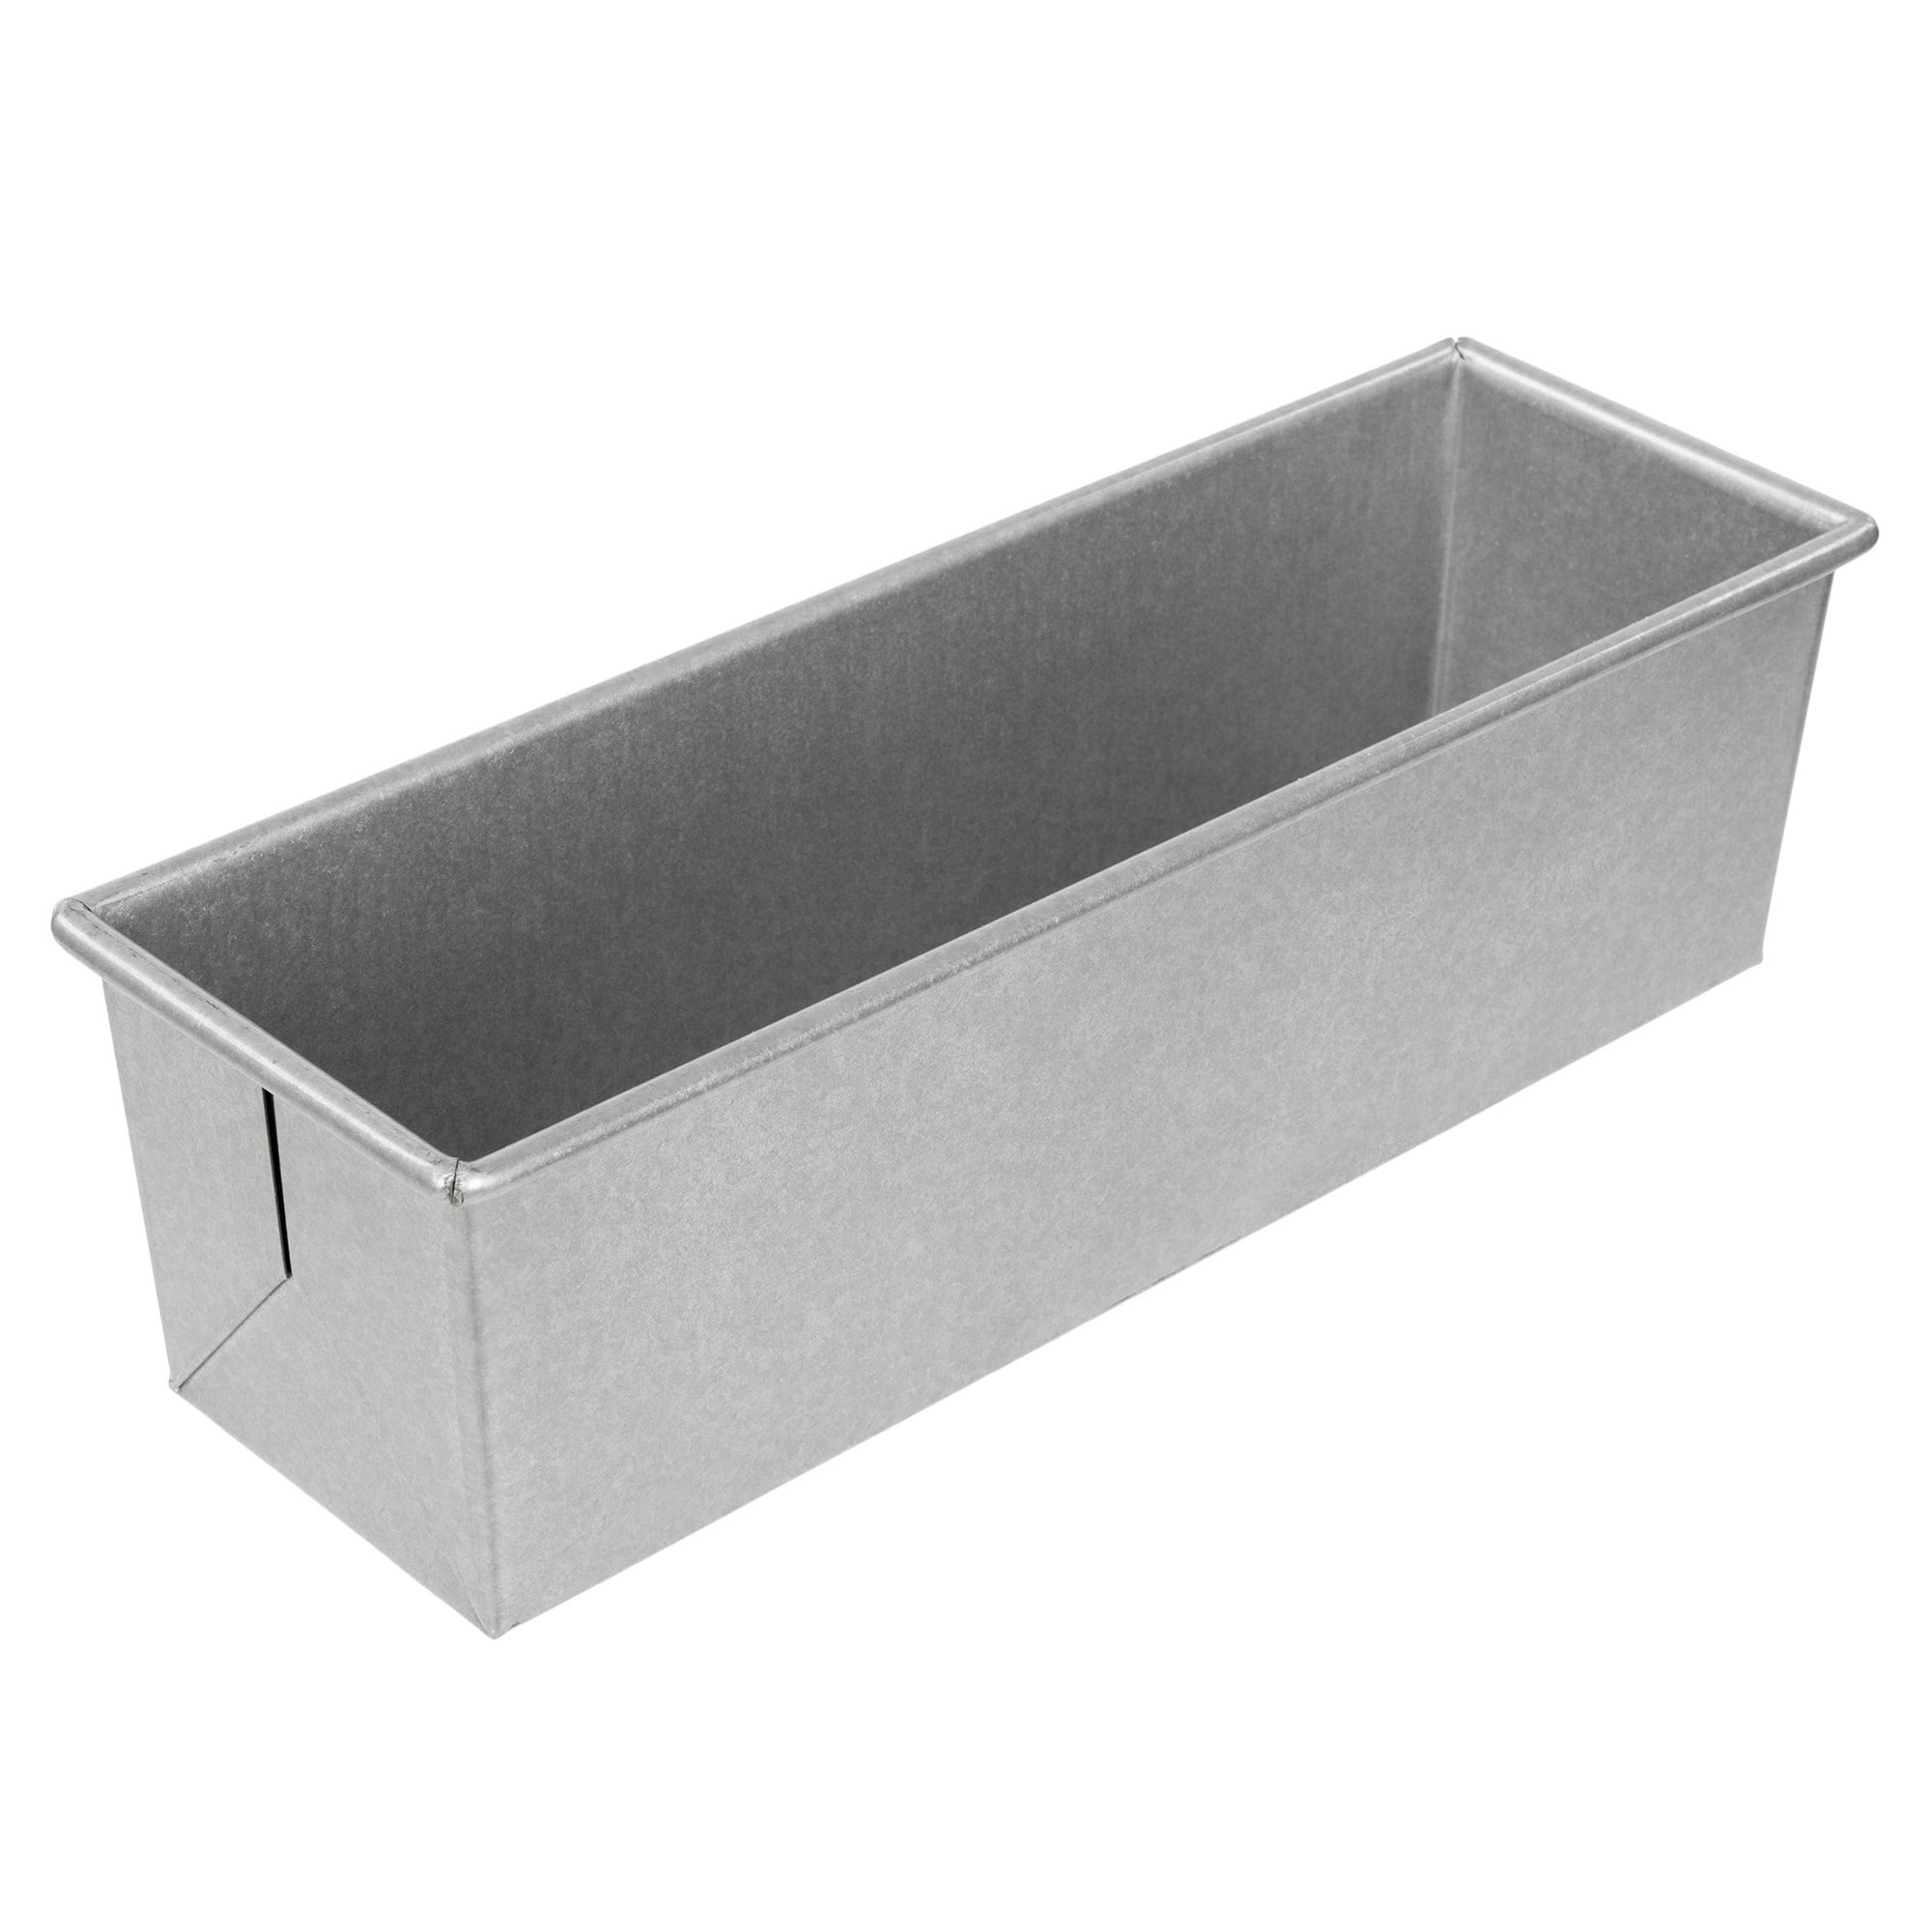 16" Details about   Focus Foodservice Pullman Loaf Pan 